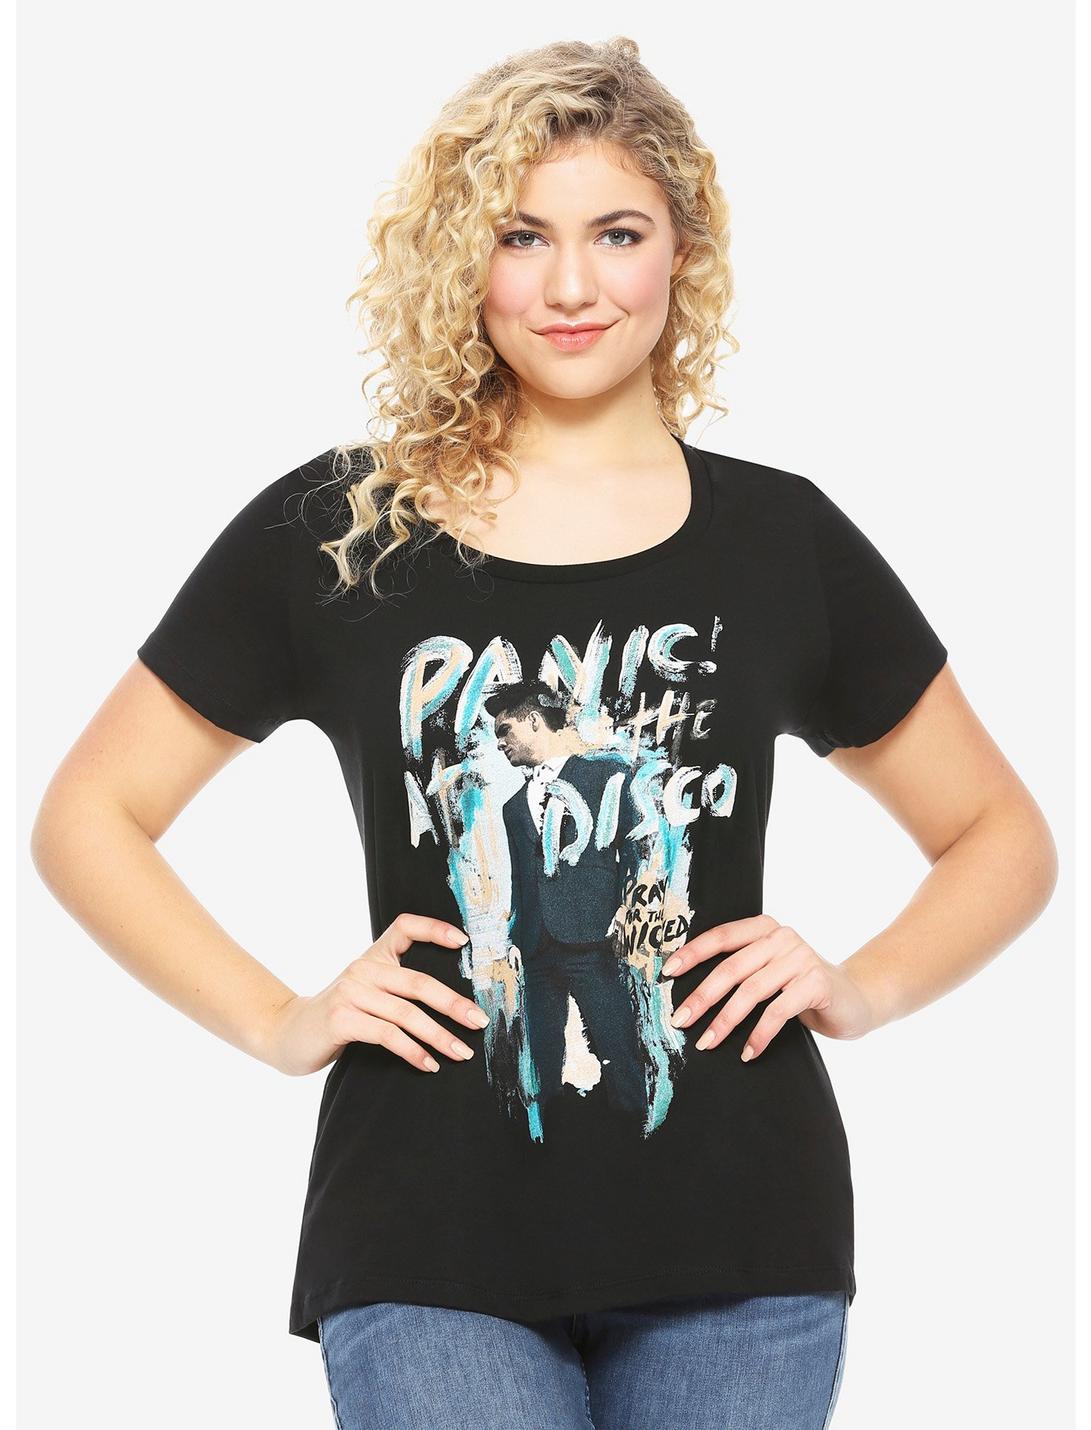 Panic! At The Disco Pray For The Wicked Album Art Girls T-Shirt Plus Size, BLACK, hi-res